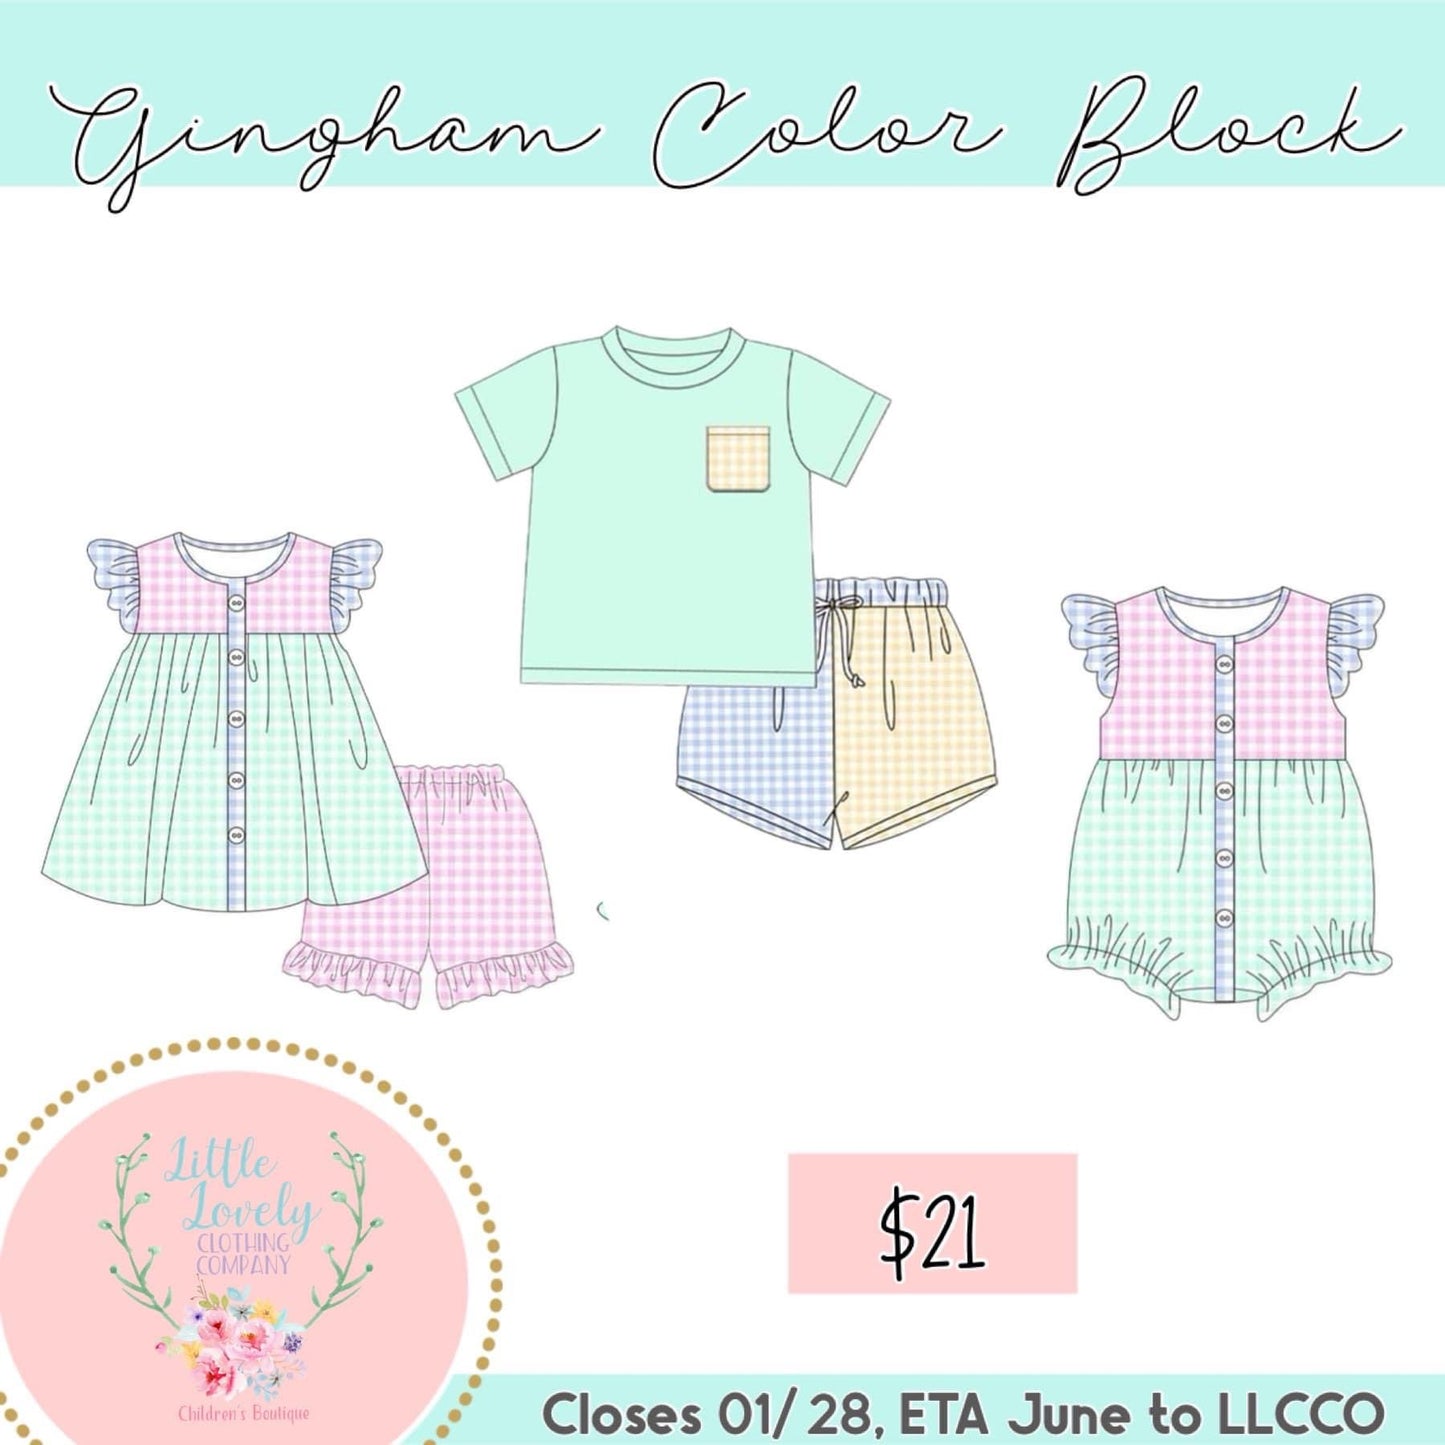 Gingham Color Block Collection Pre-Sale, ETA June to LLCCO, then to Customers